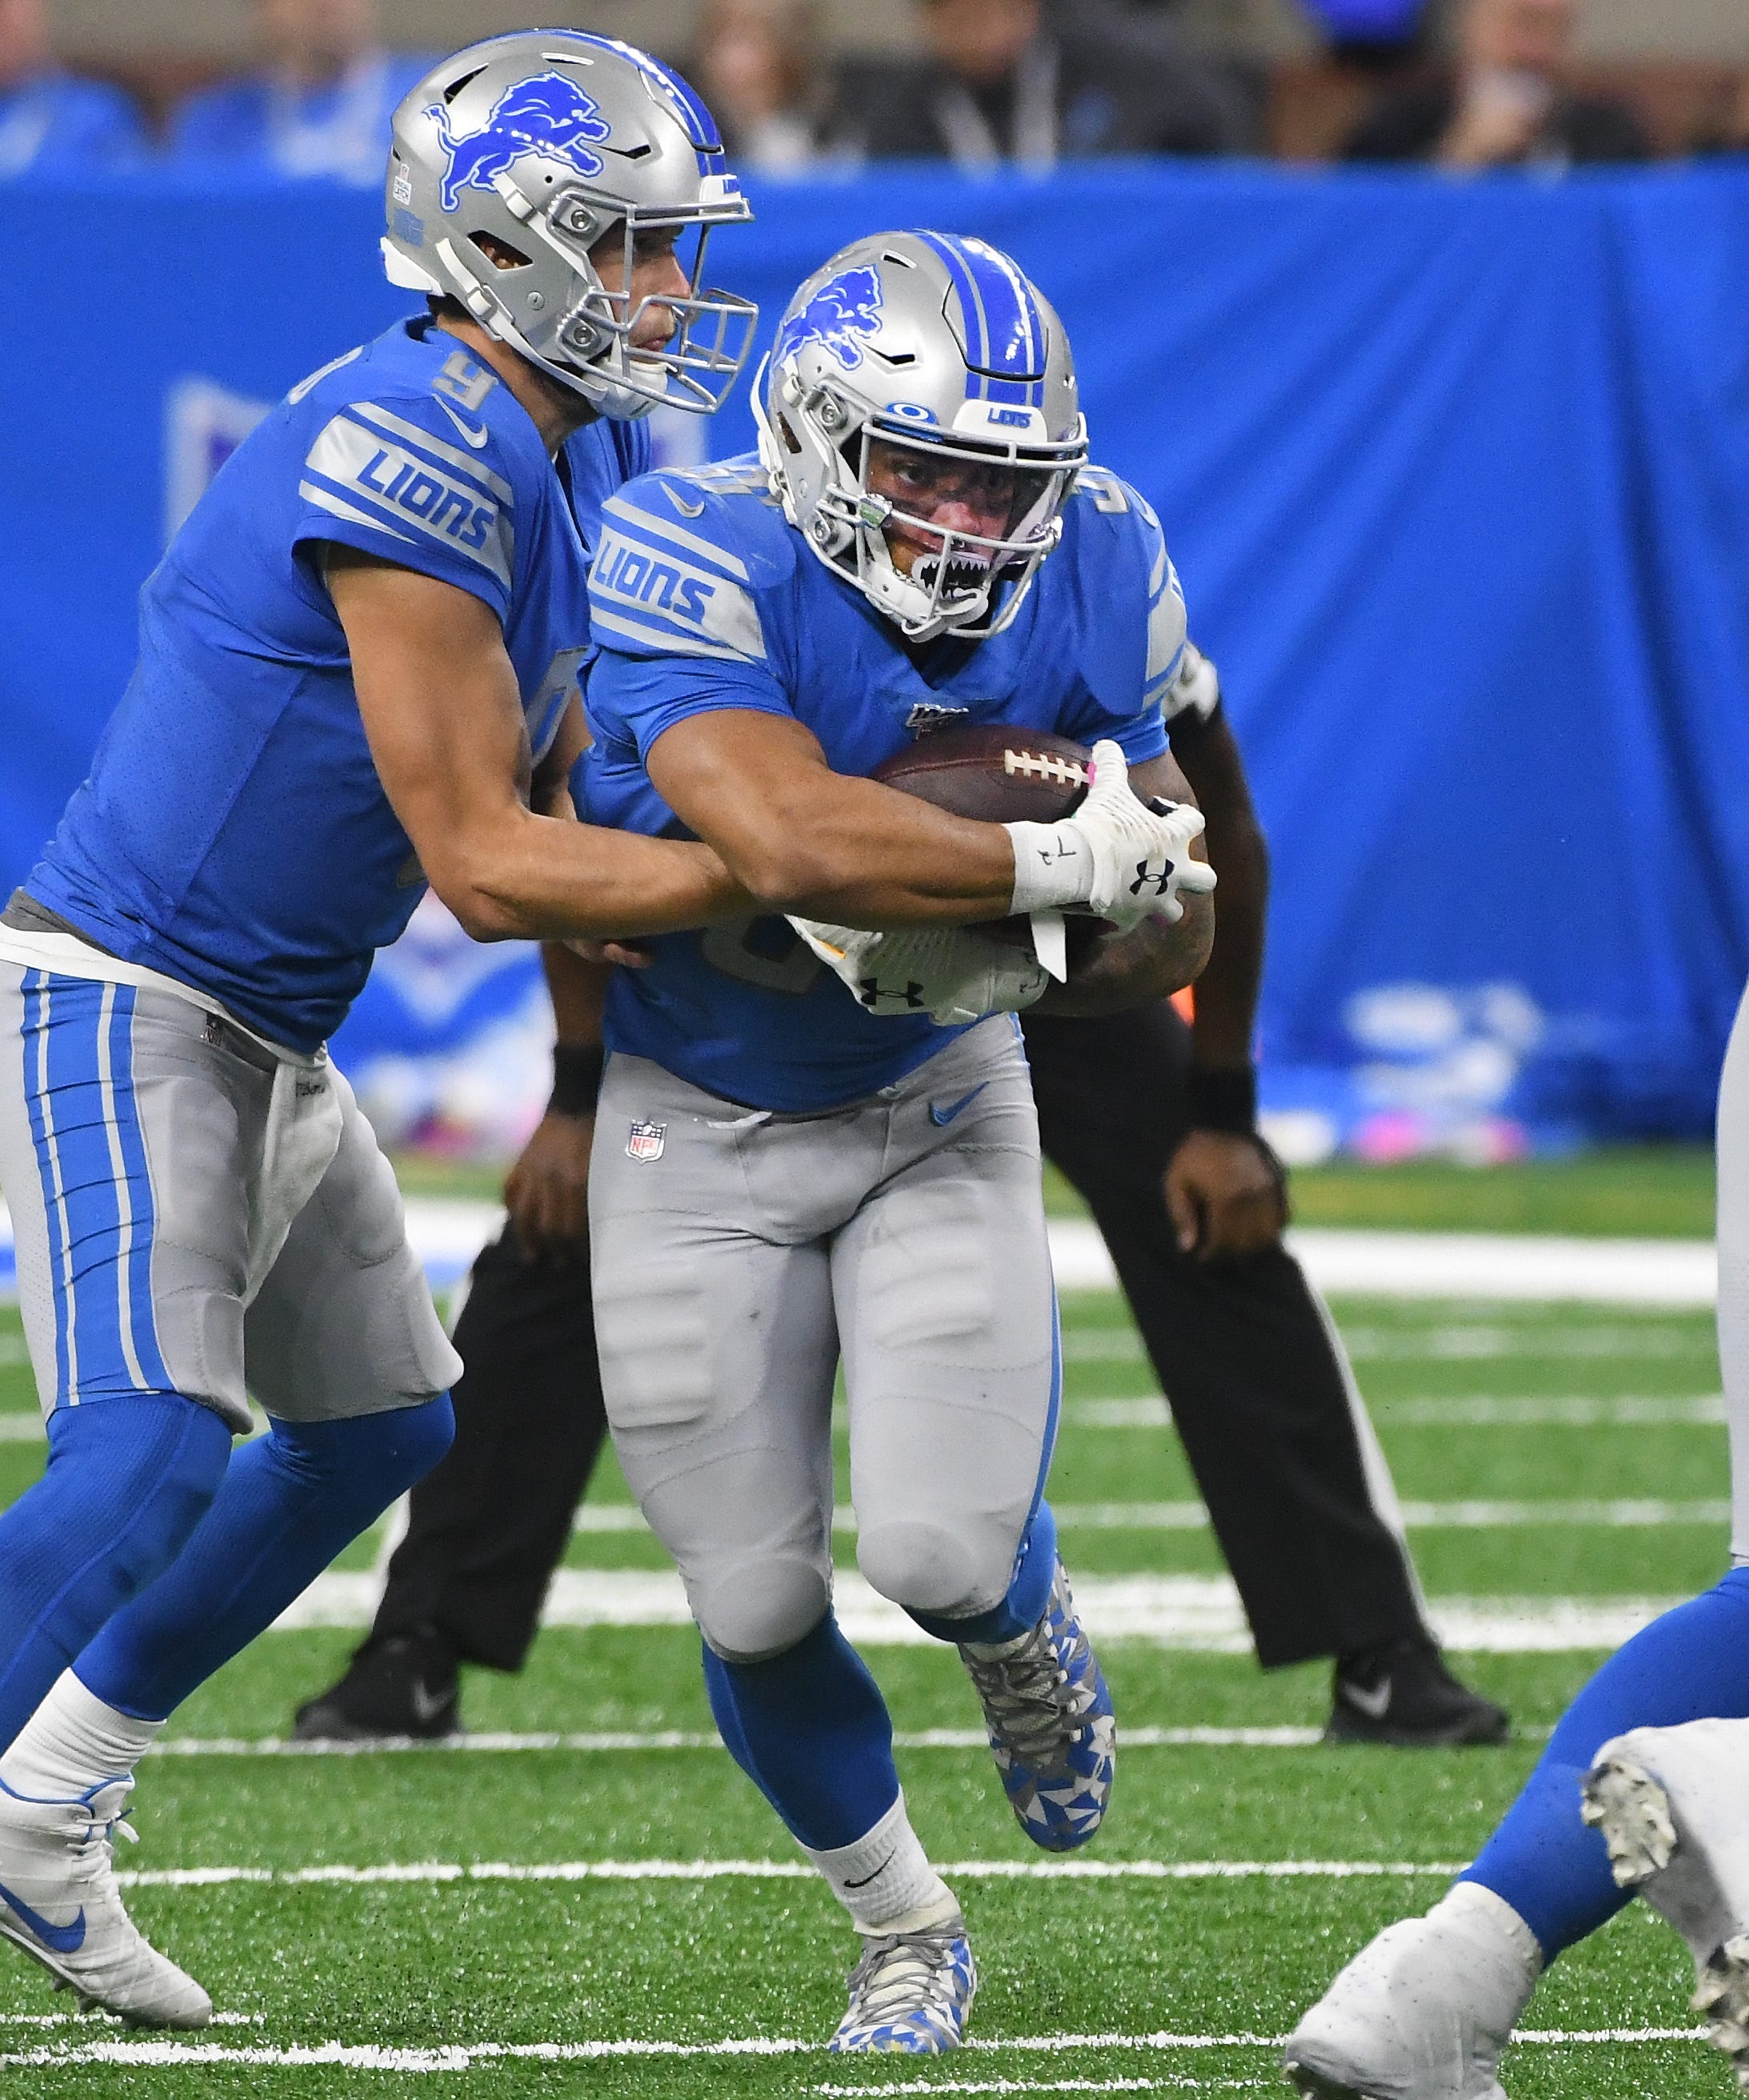 Ty Johnson, running back: Johnson’s rookie line was buoyed by a 40-yard carry at the end of the first half in the season finale. Beyond that romp, he averaged 3.8 yards per attempt. He was even more inefficient as a receiver, averaging 4.5 yards on his 24 receptions, well-below average, even for a running back. The Lions are hypnotized by Johnson’s electric speed, but they’ll need to find ways to utilize it next season or someone else could step up and snatch his roster spot away. Grade: D+